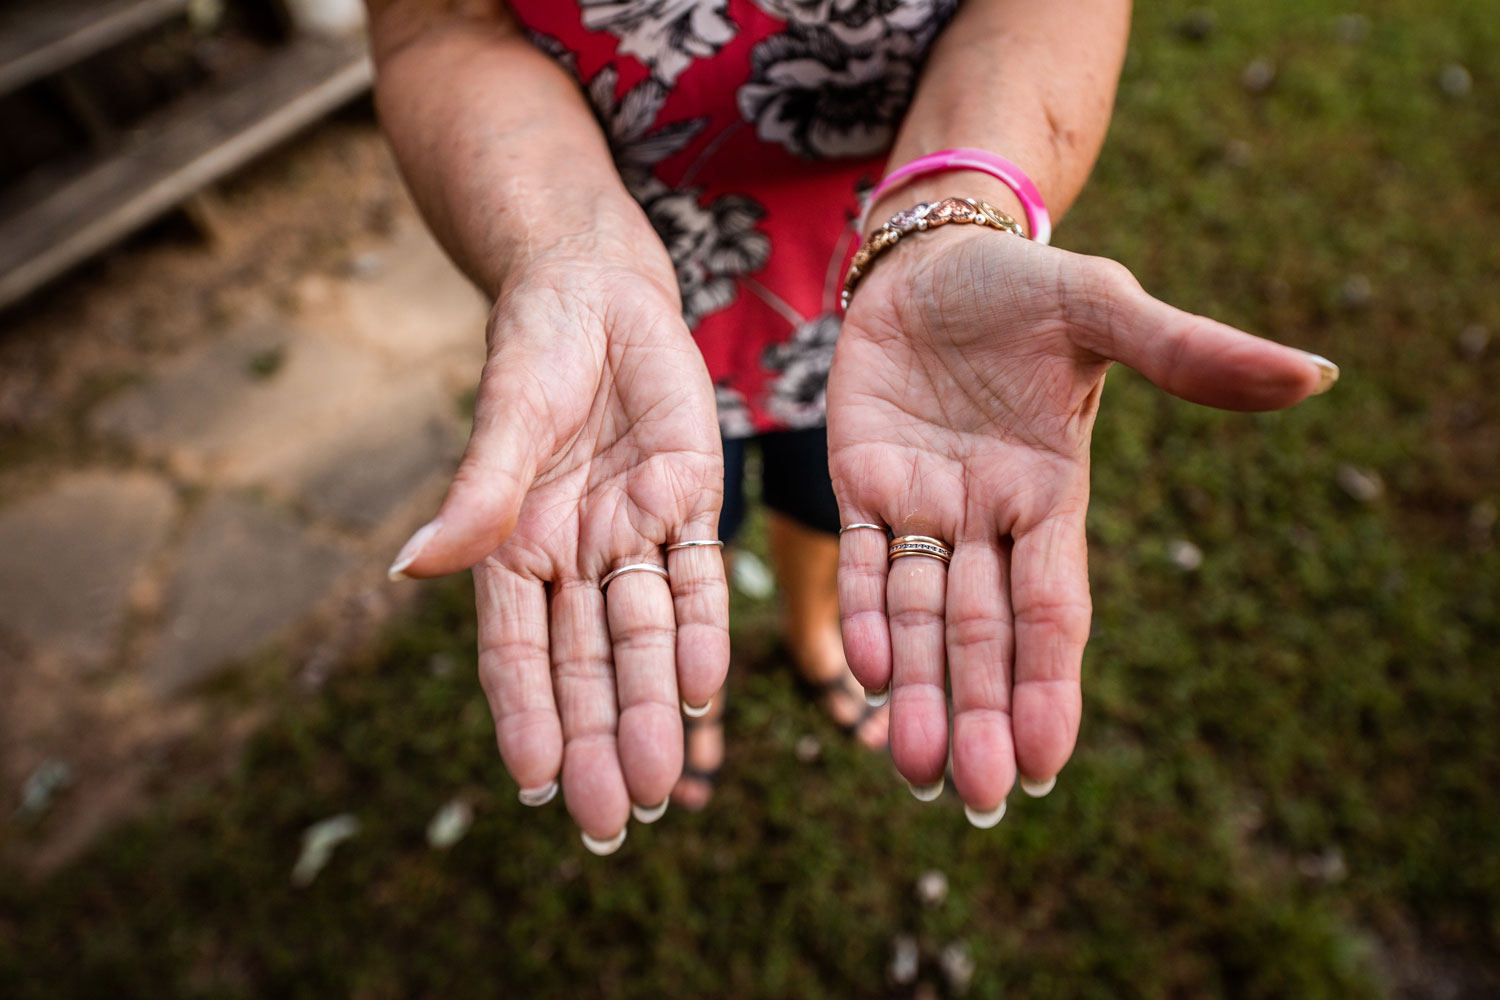 A photo of a woman's hands outstretched.